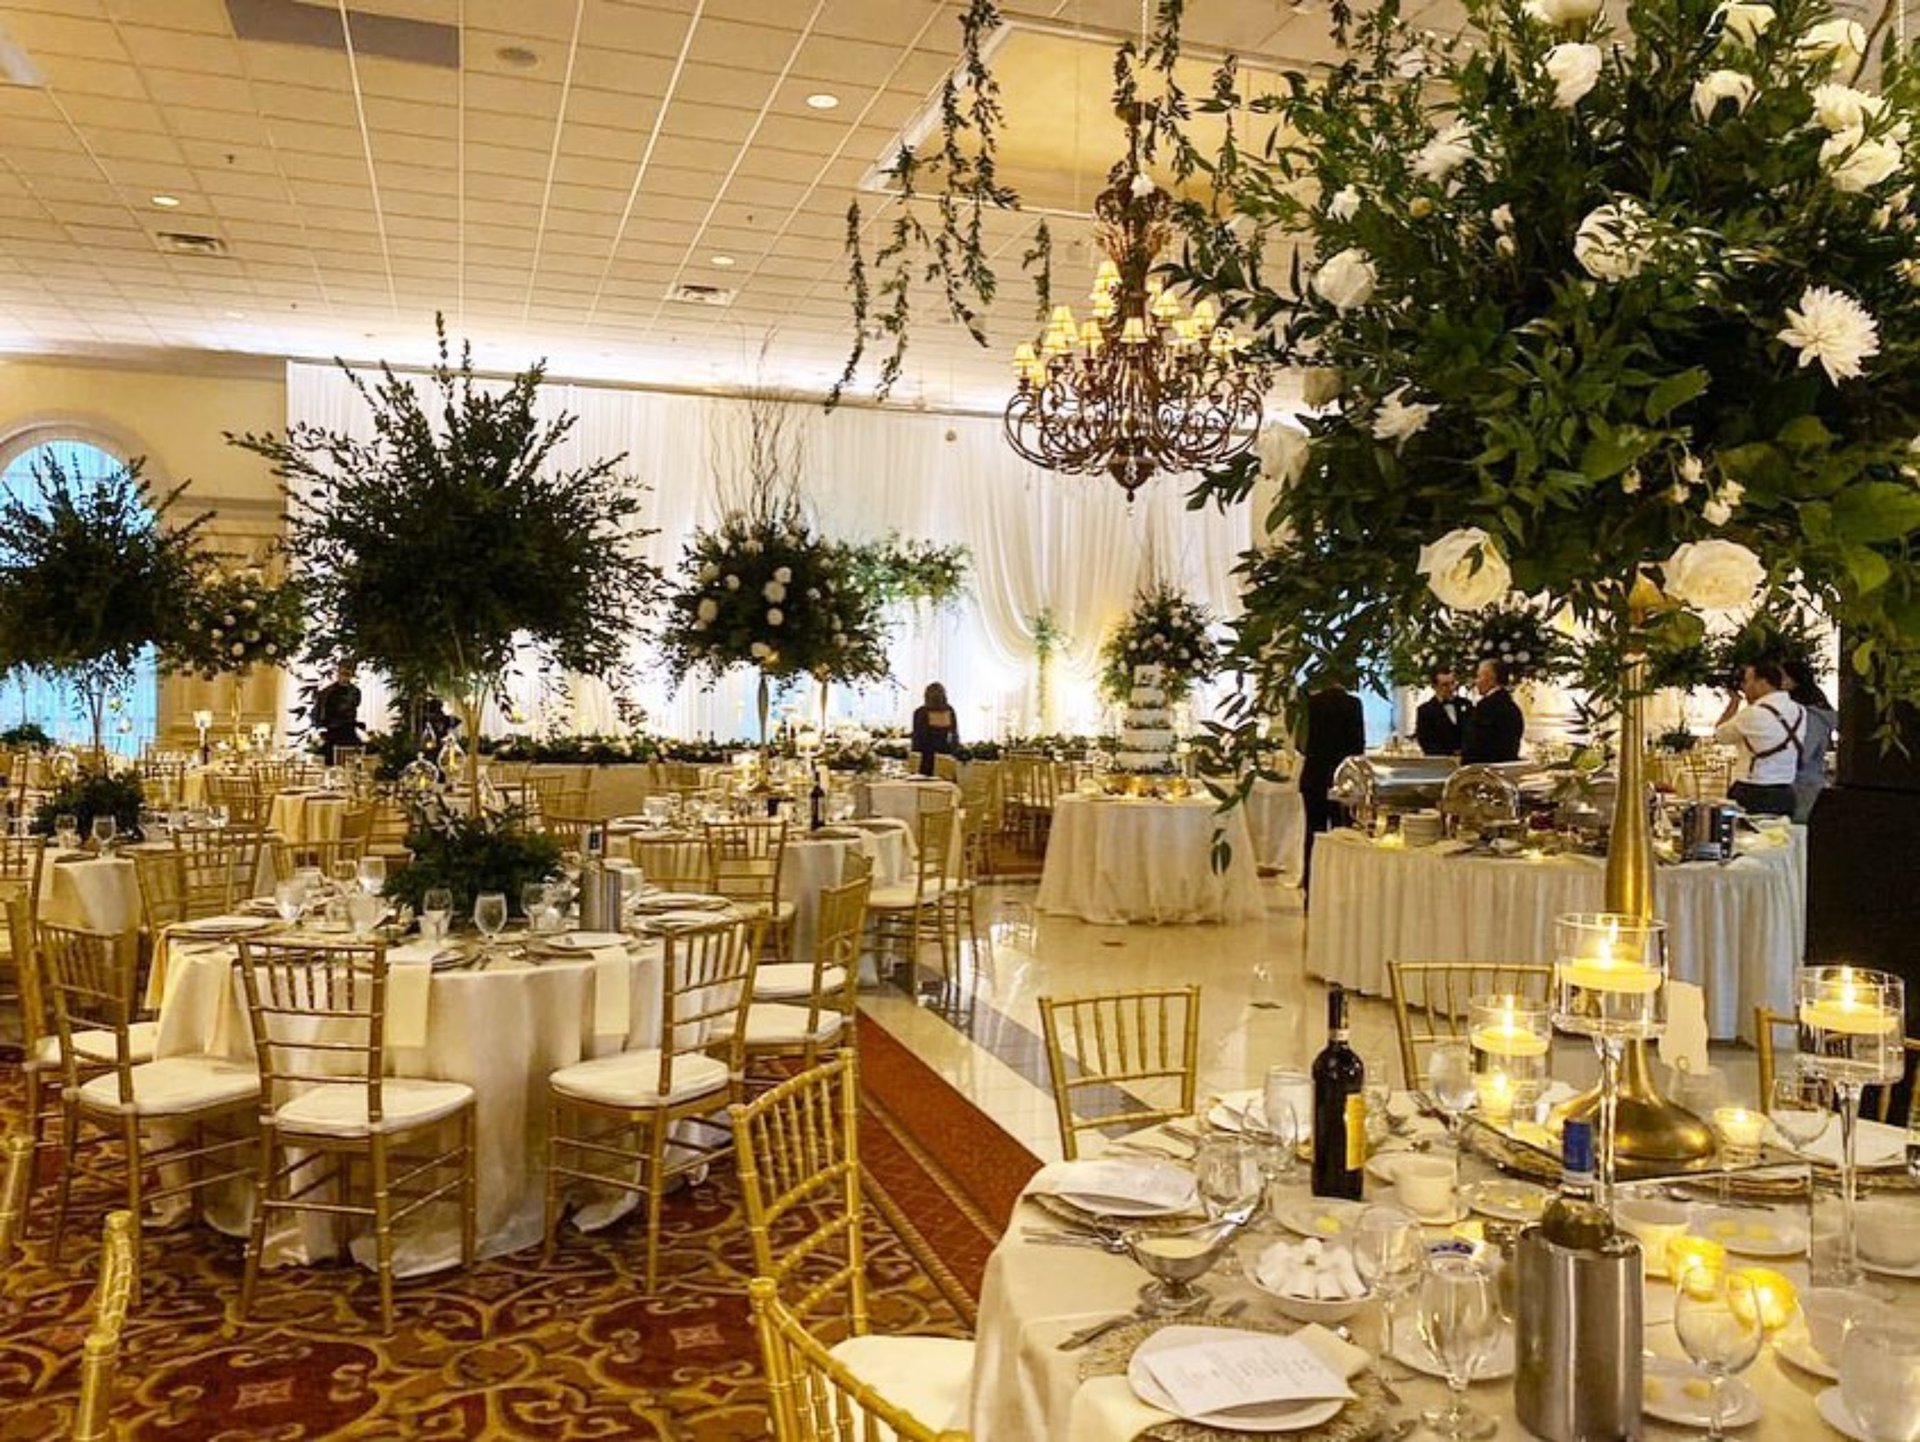 The Palazzo Grande Roma Ballroom Banquet Hall in Shelby Township